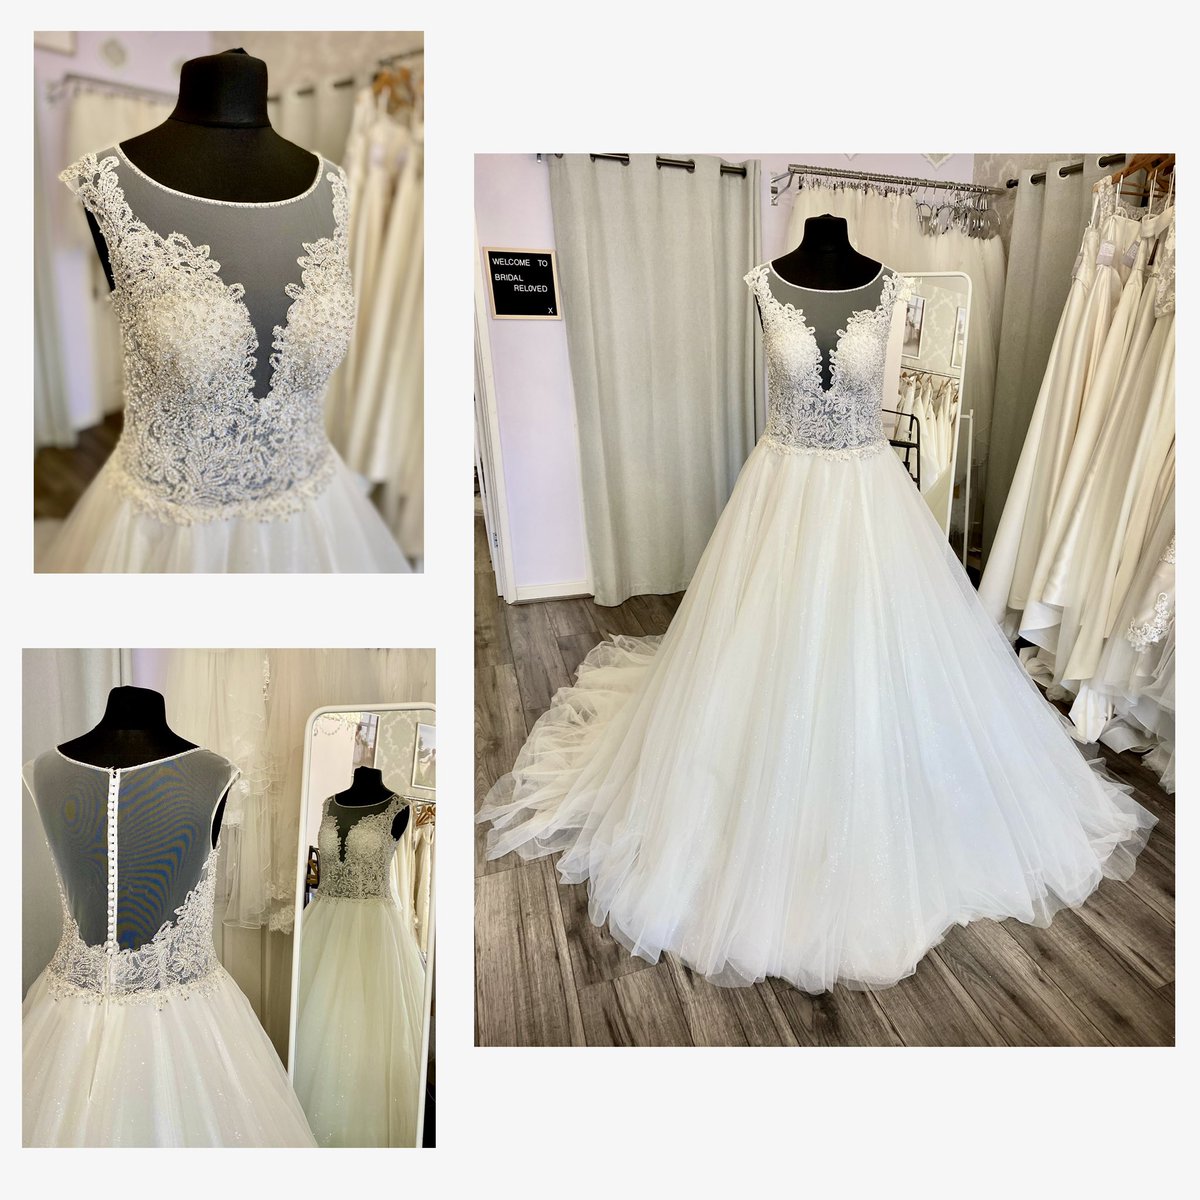 If you’re a princess bride then this stunning gown could be the one for you! 

A full A line skirt with a sparkling bodice, plunge front and illusion back gives princess vibes!

DM for more details 💖 xx

#weddingdress #bridetobe #bridalreloved #Coventry #princessbride